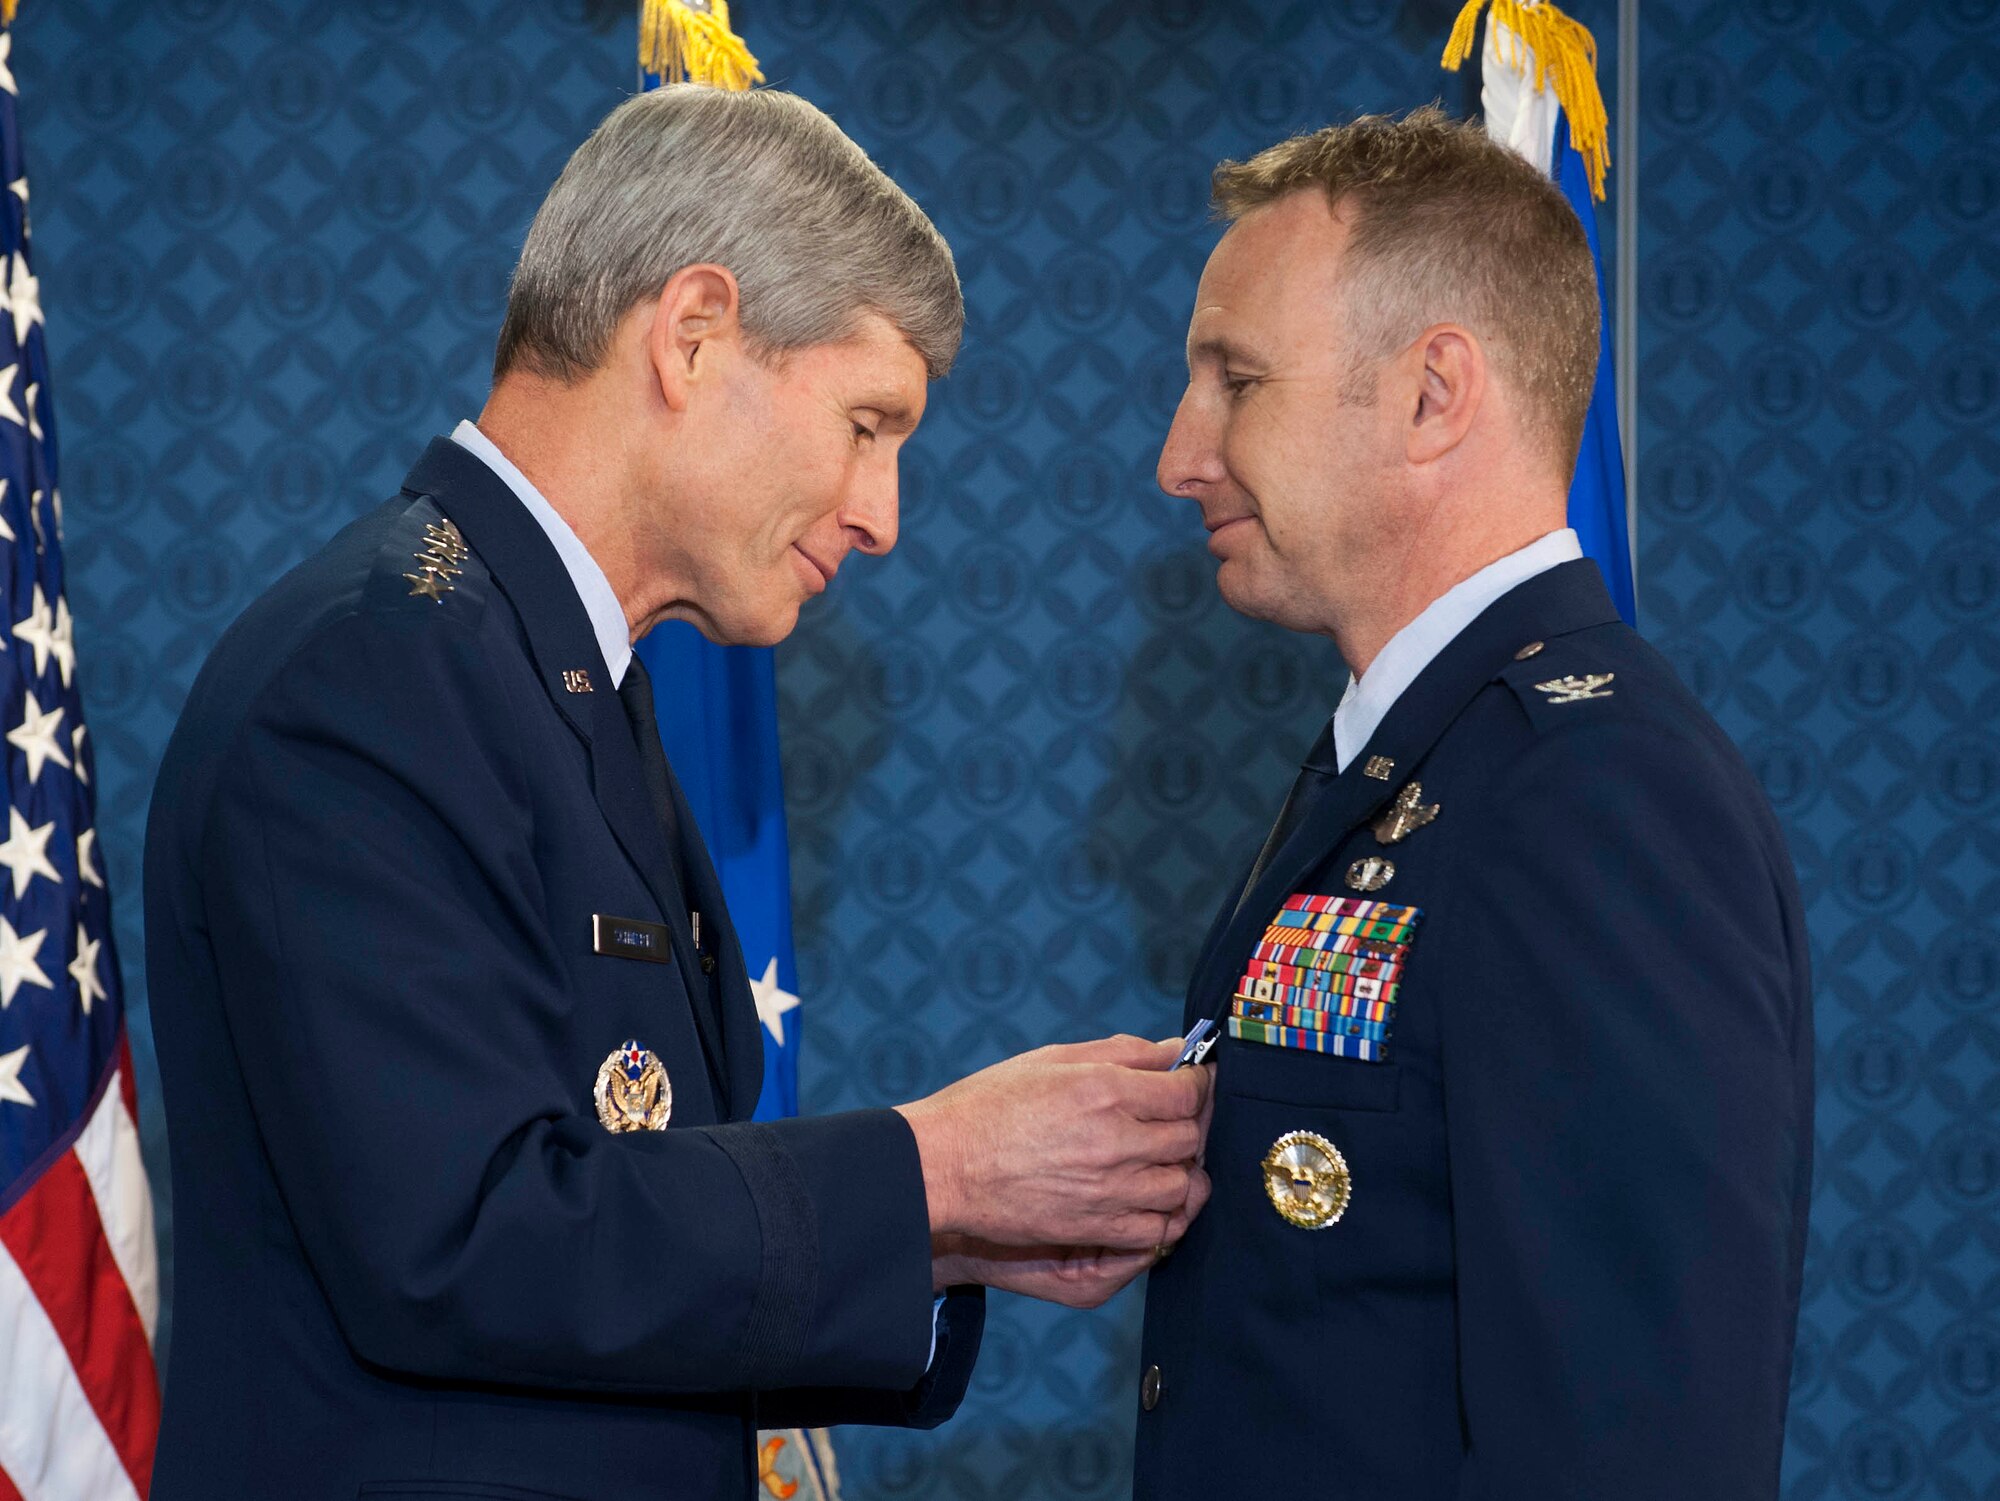 Air Force Chief of Staff Gen. Norton Schwartz (left) presents the first of two Distinguished Flying Cross with Valor medals to Col. Christopher Barnett during a ceremony in the Pentagon on May 18, 2012.  Barnett also received the Bronze Star during the ceremony.  (U.S. Air Force photo/Jim Varhegyi)